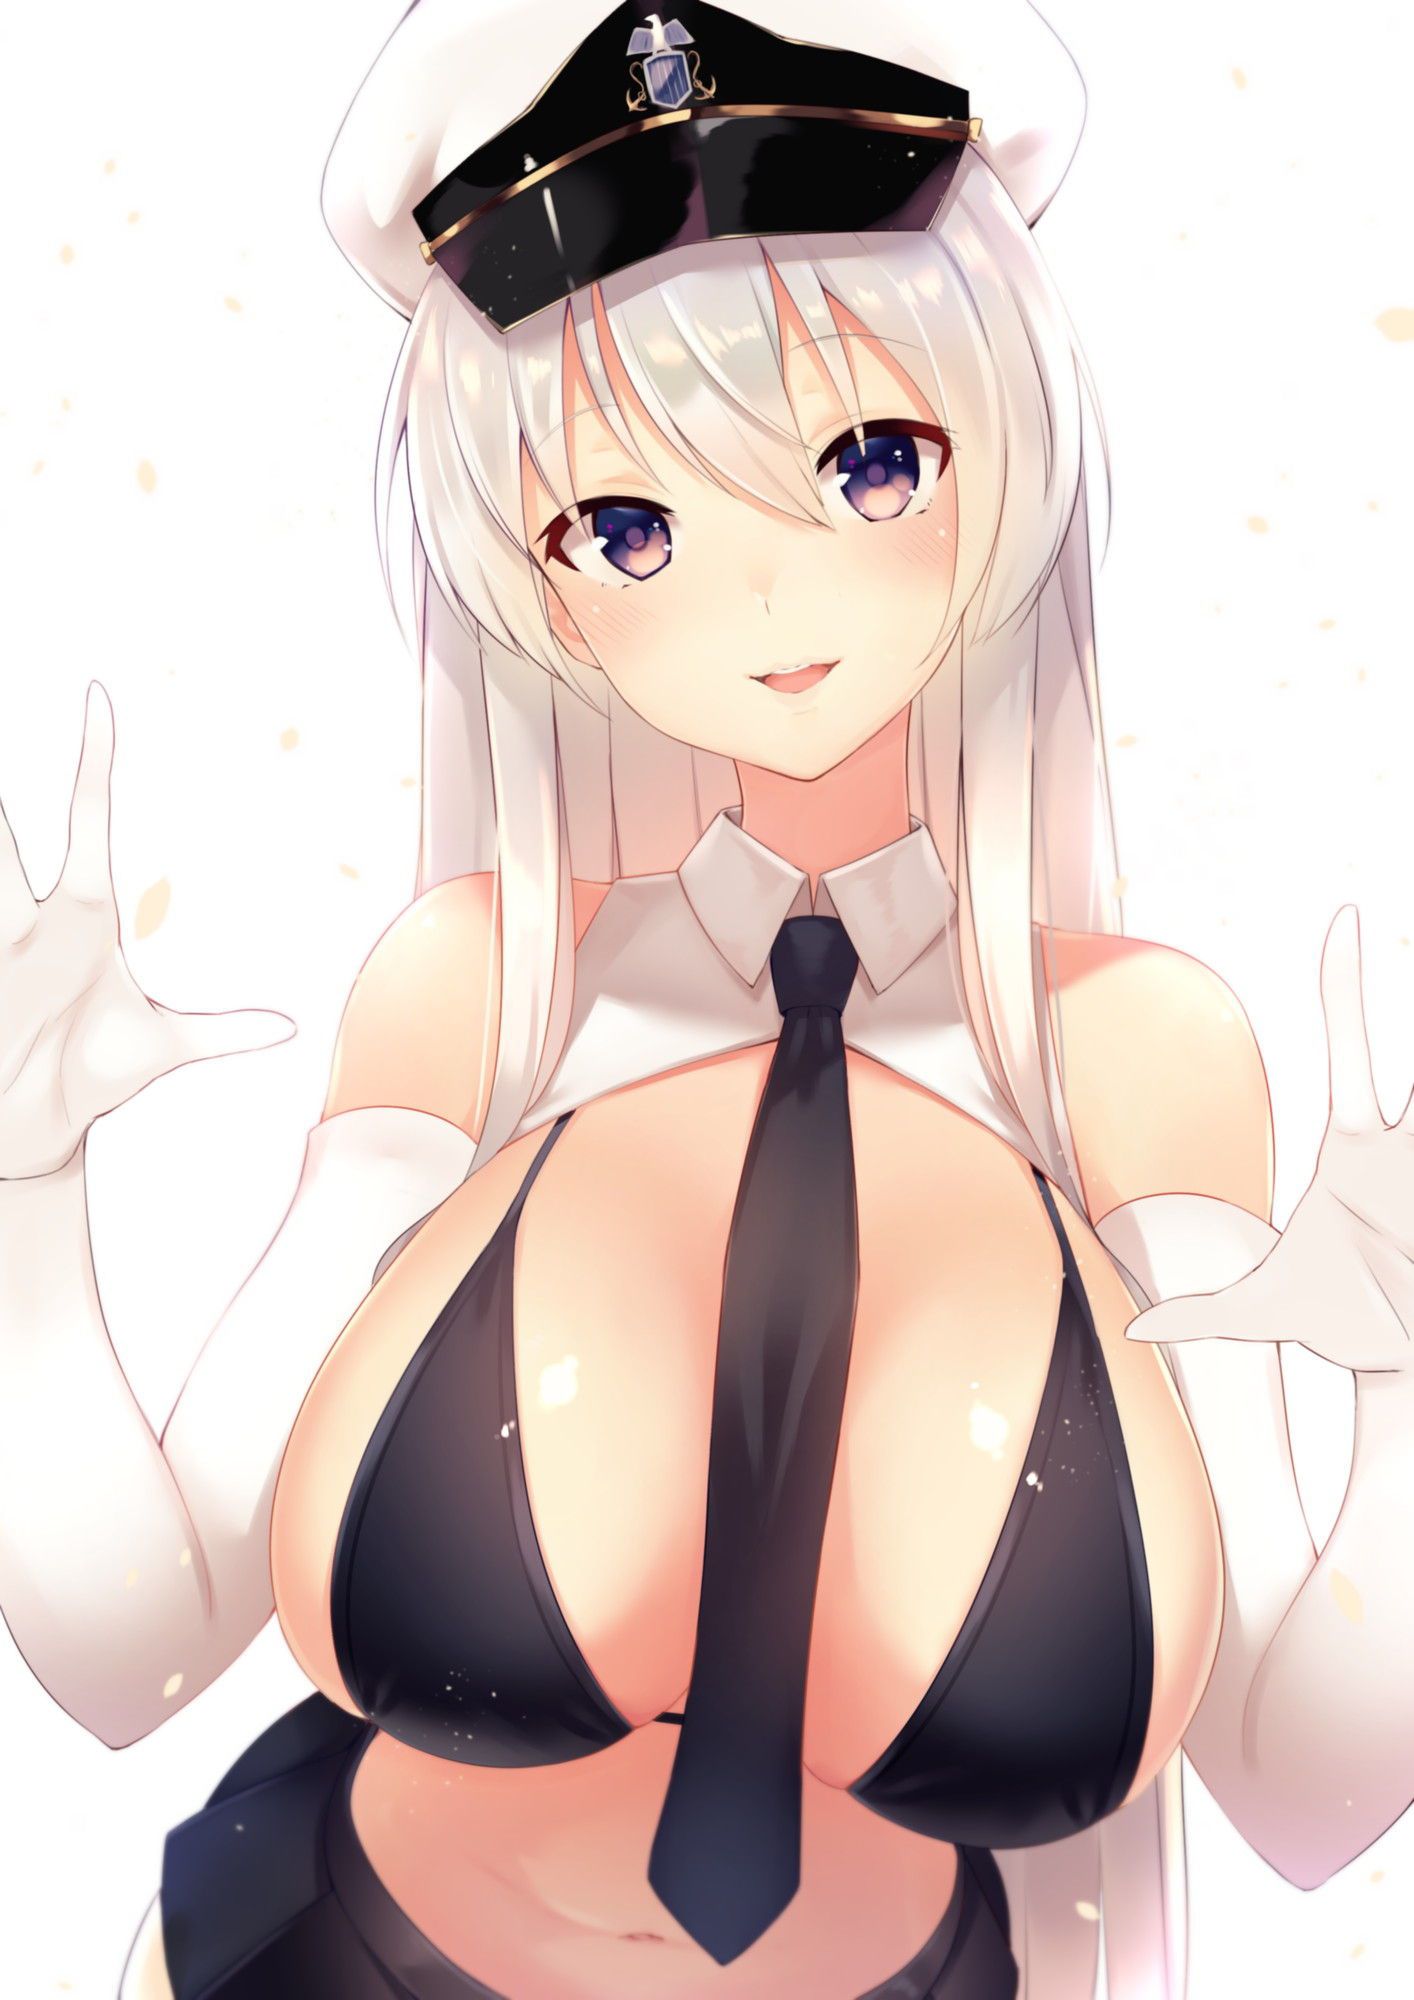 Gather people who want to see the erotic images of Azur Lane! 20